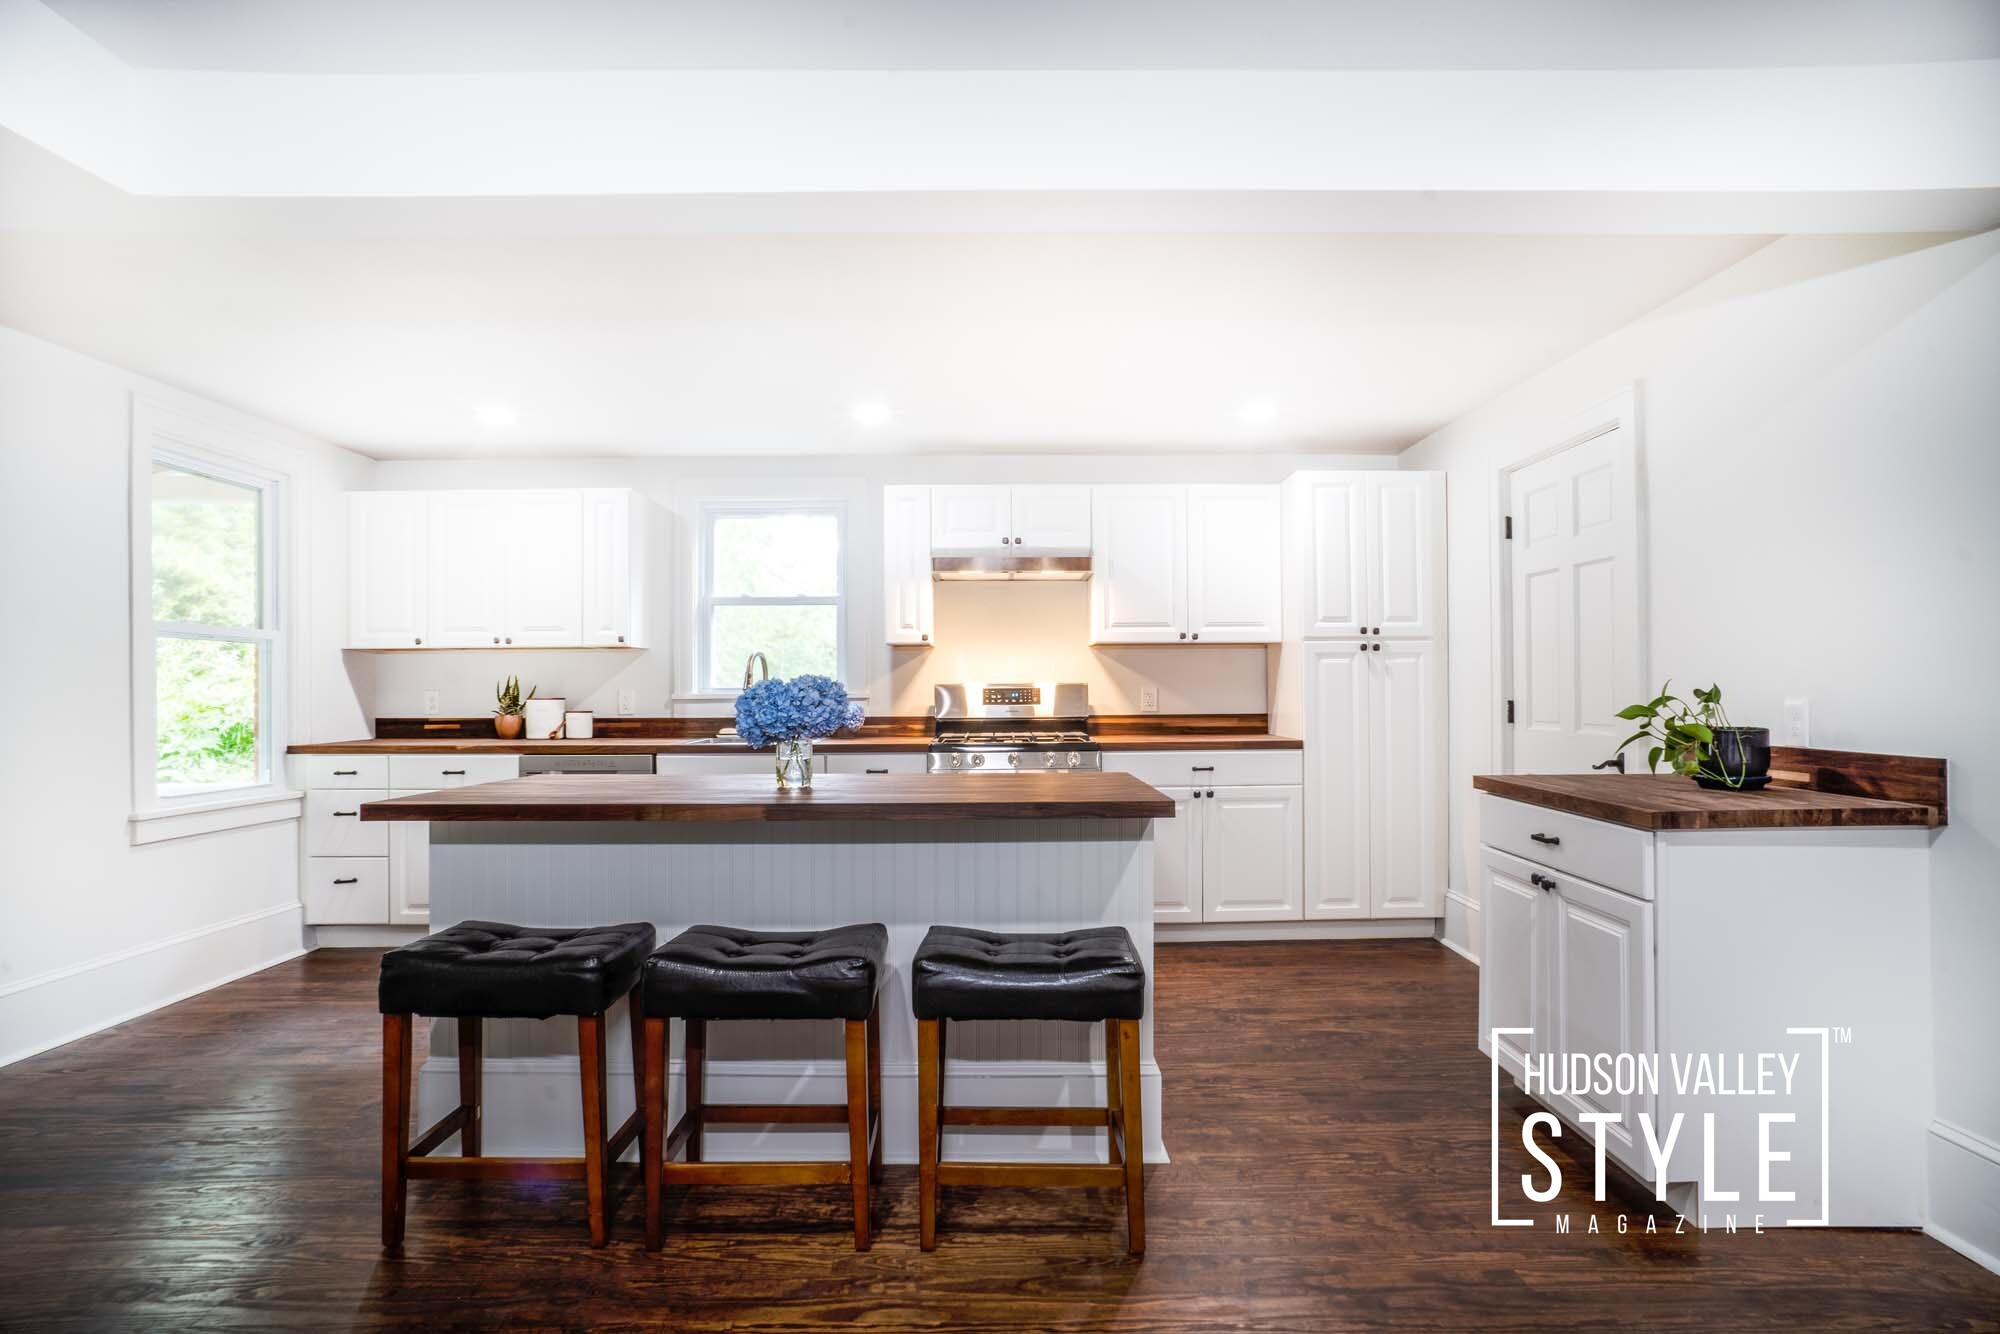 Beautifully Renovated Hudson Valley Farmhouse in Fishkill, NY – Real Estate Photography and Virtual Home Staging by Duncan Avenue Studios